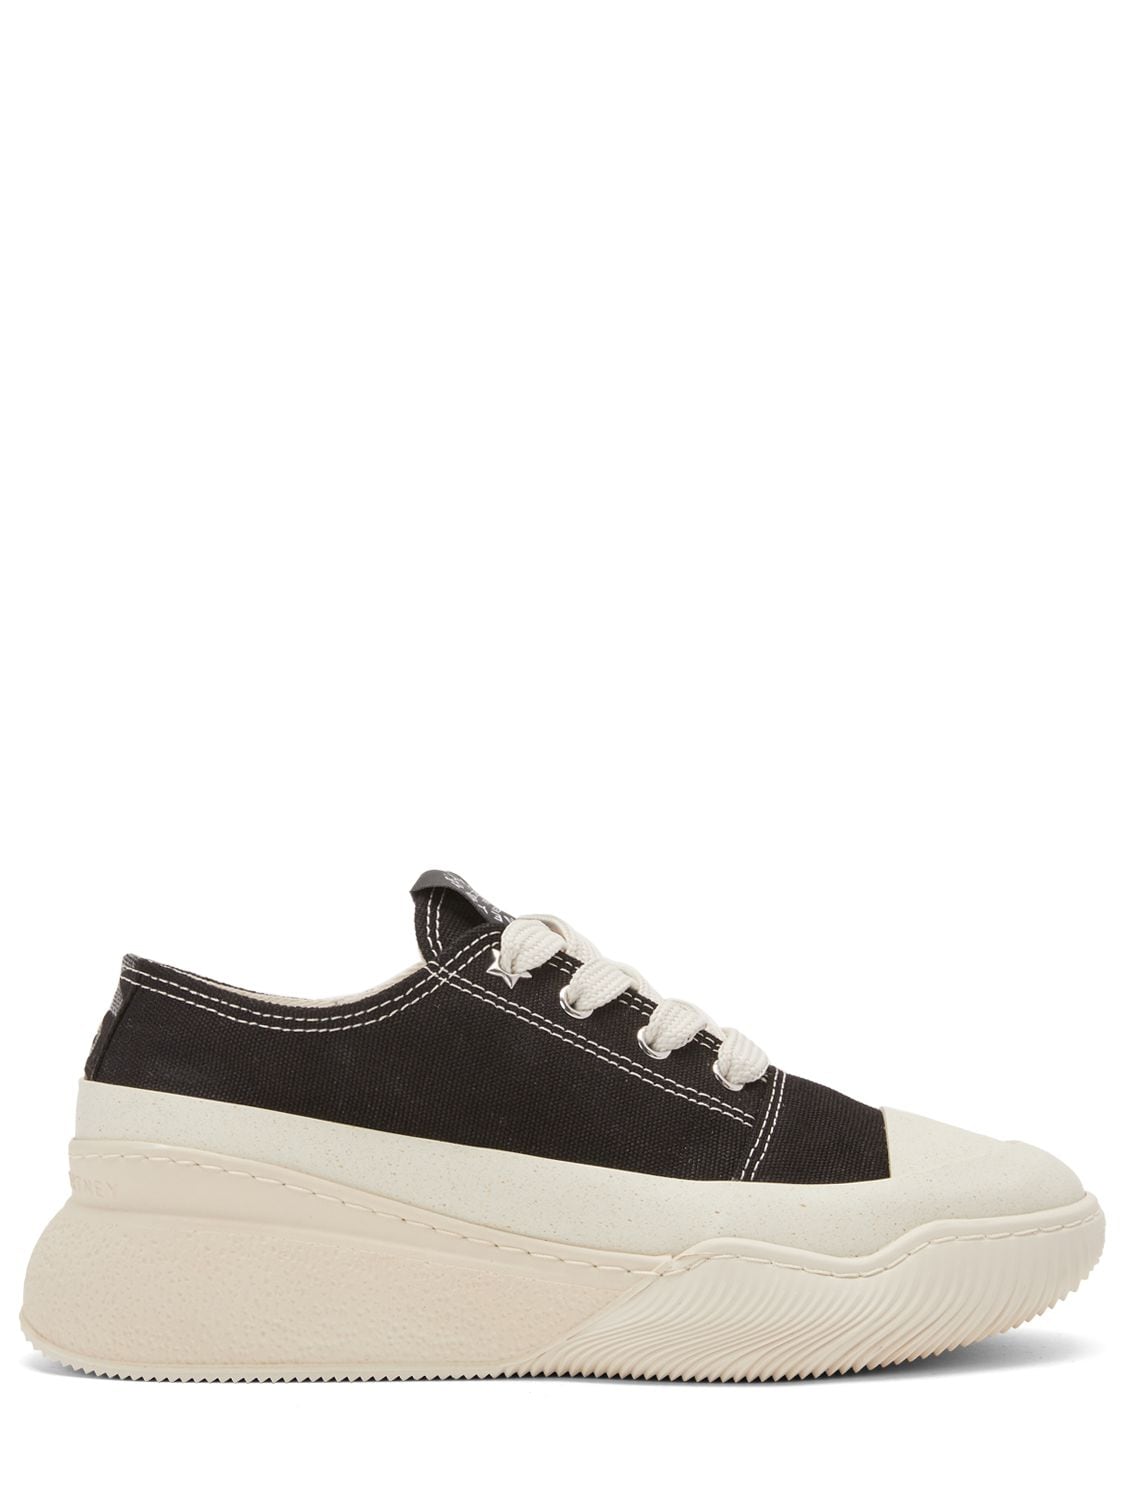 Stella Mccartney Loop Recycled Cotton Blend Sneakers In Black,off-white